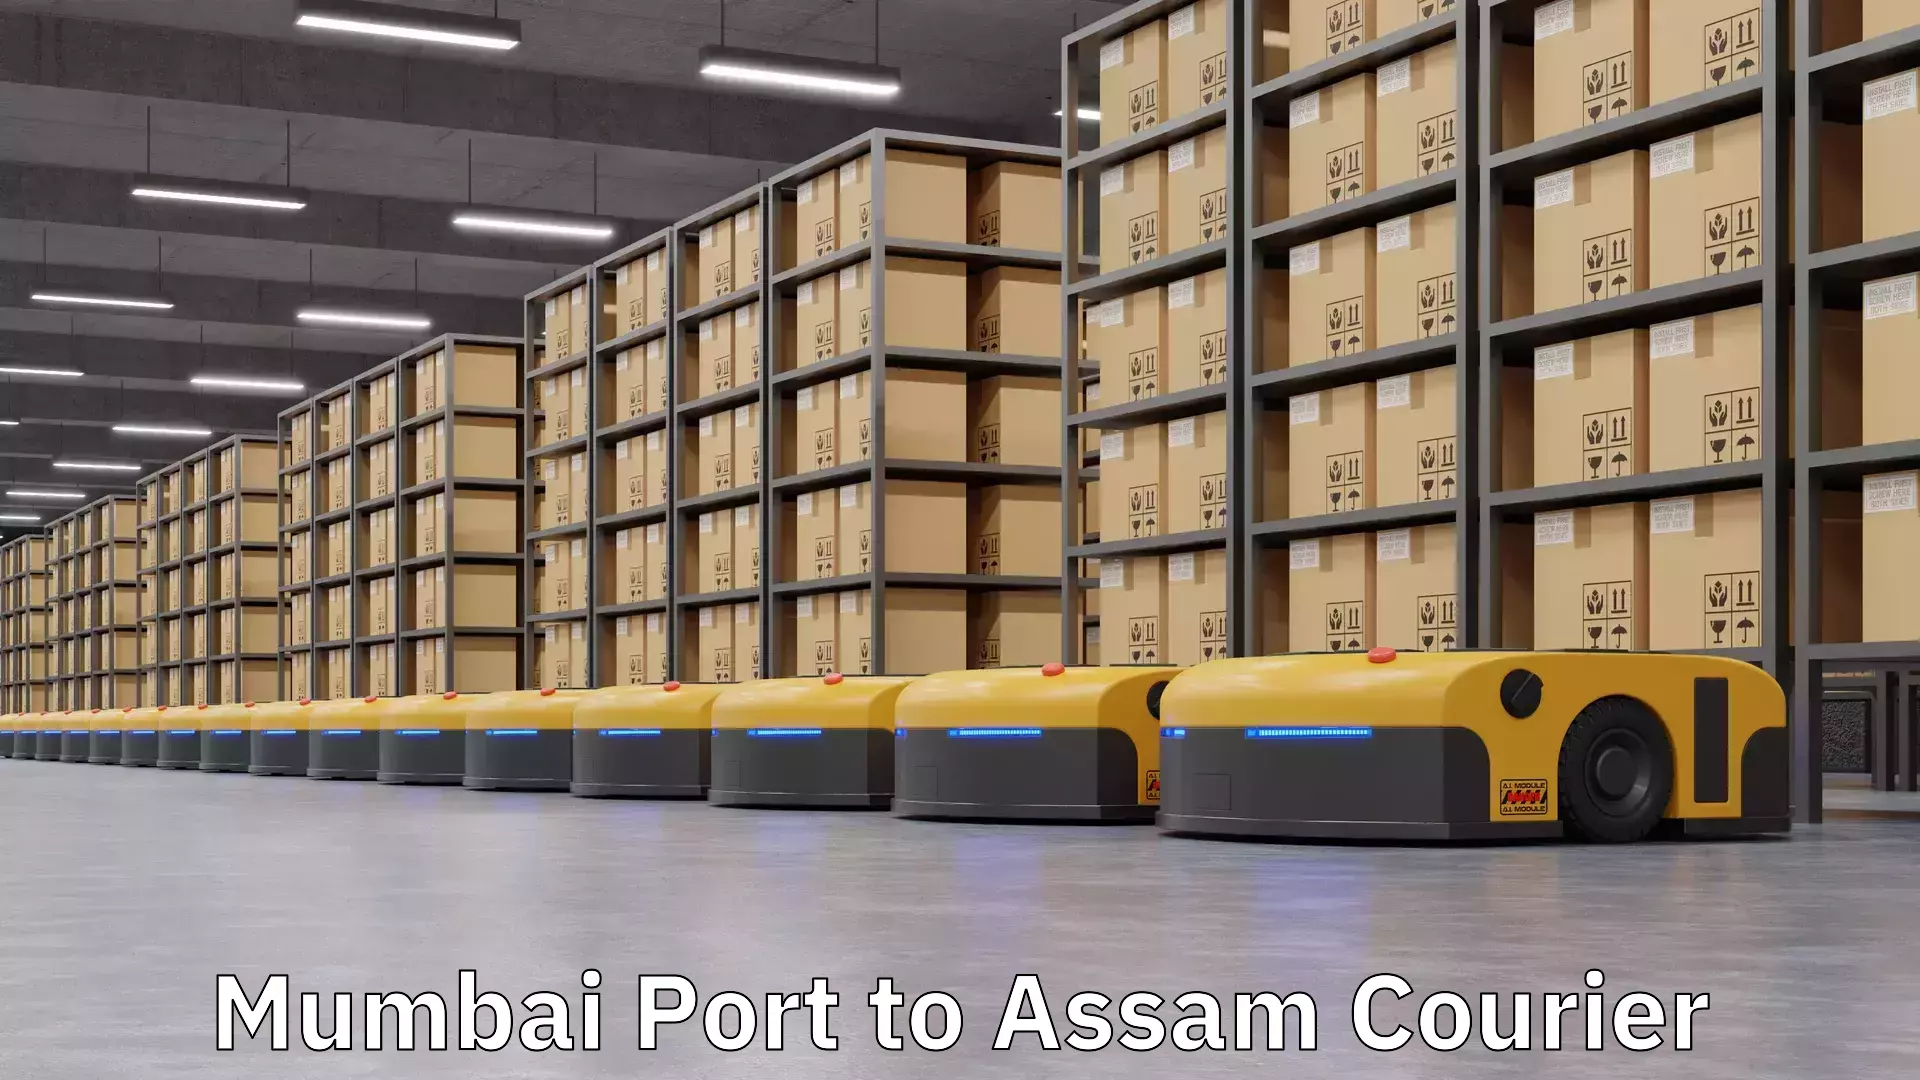 Medical delivery services Mumbai Port to Assam